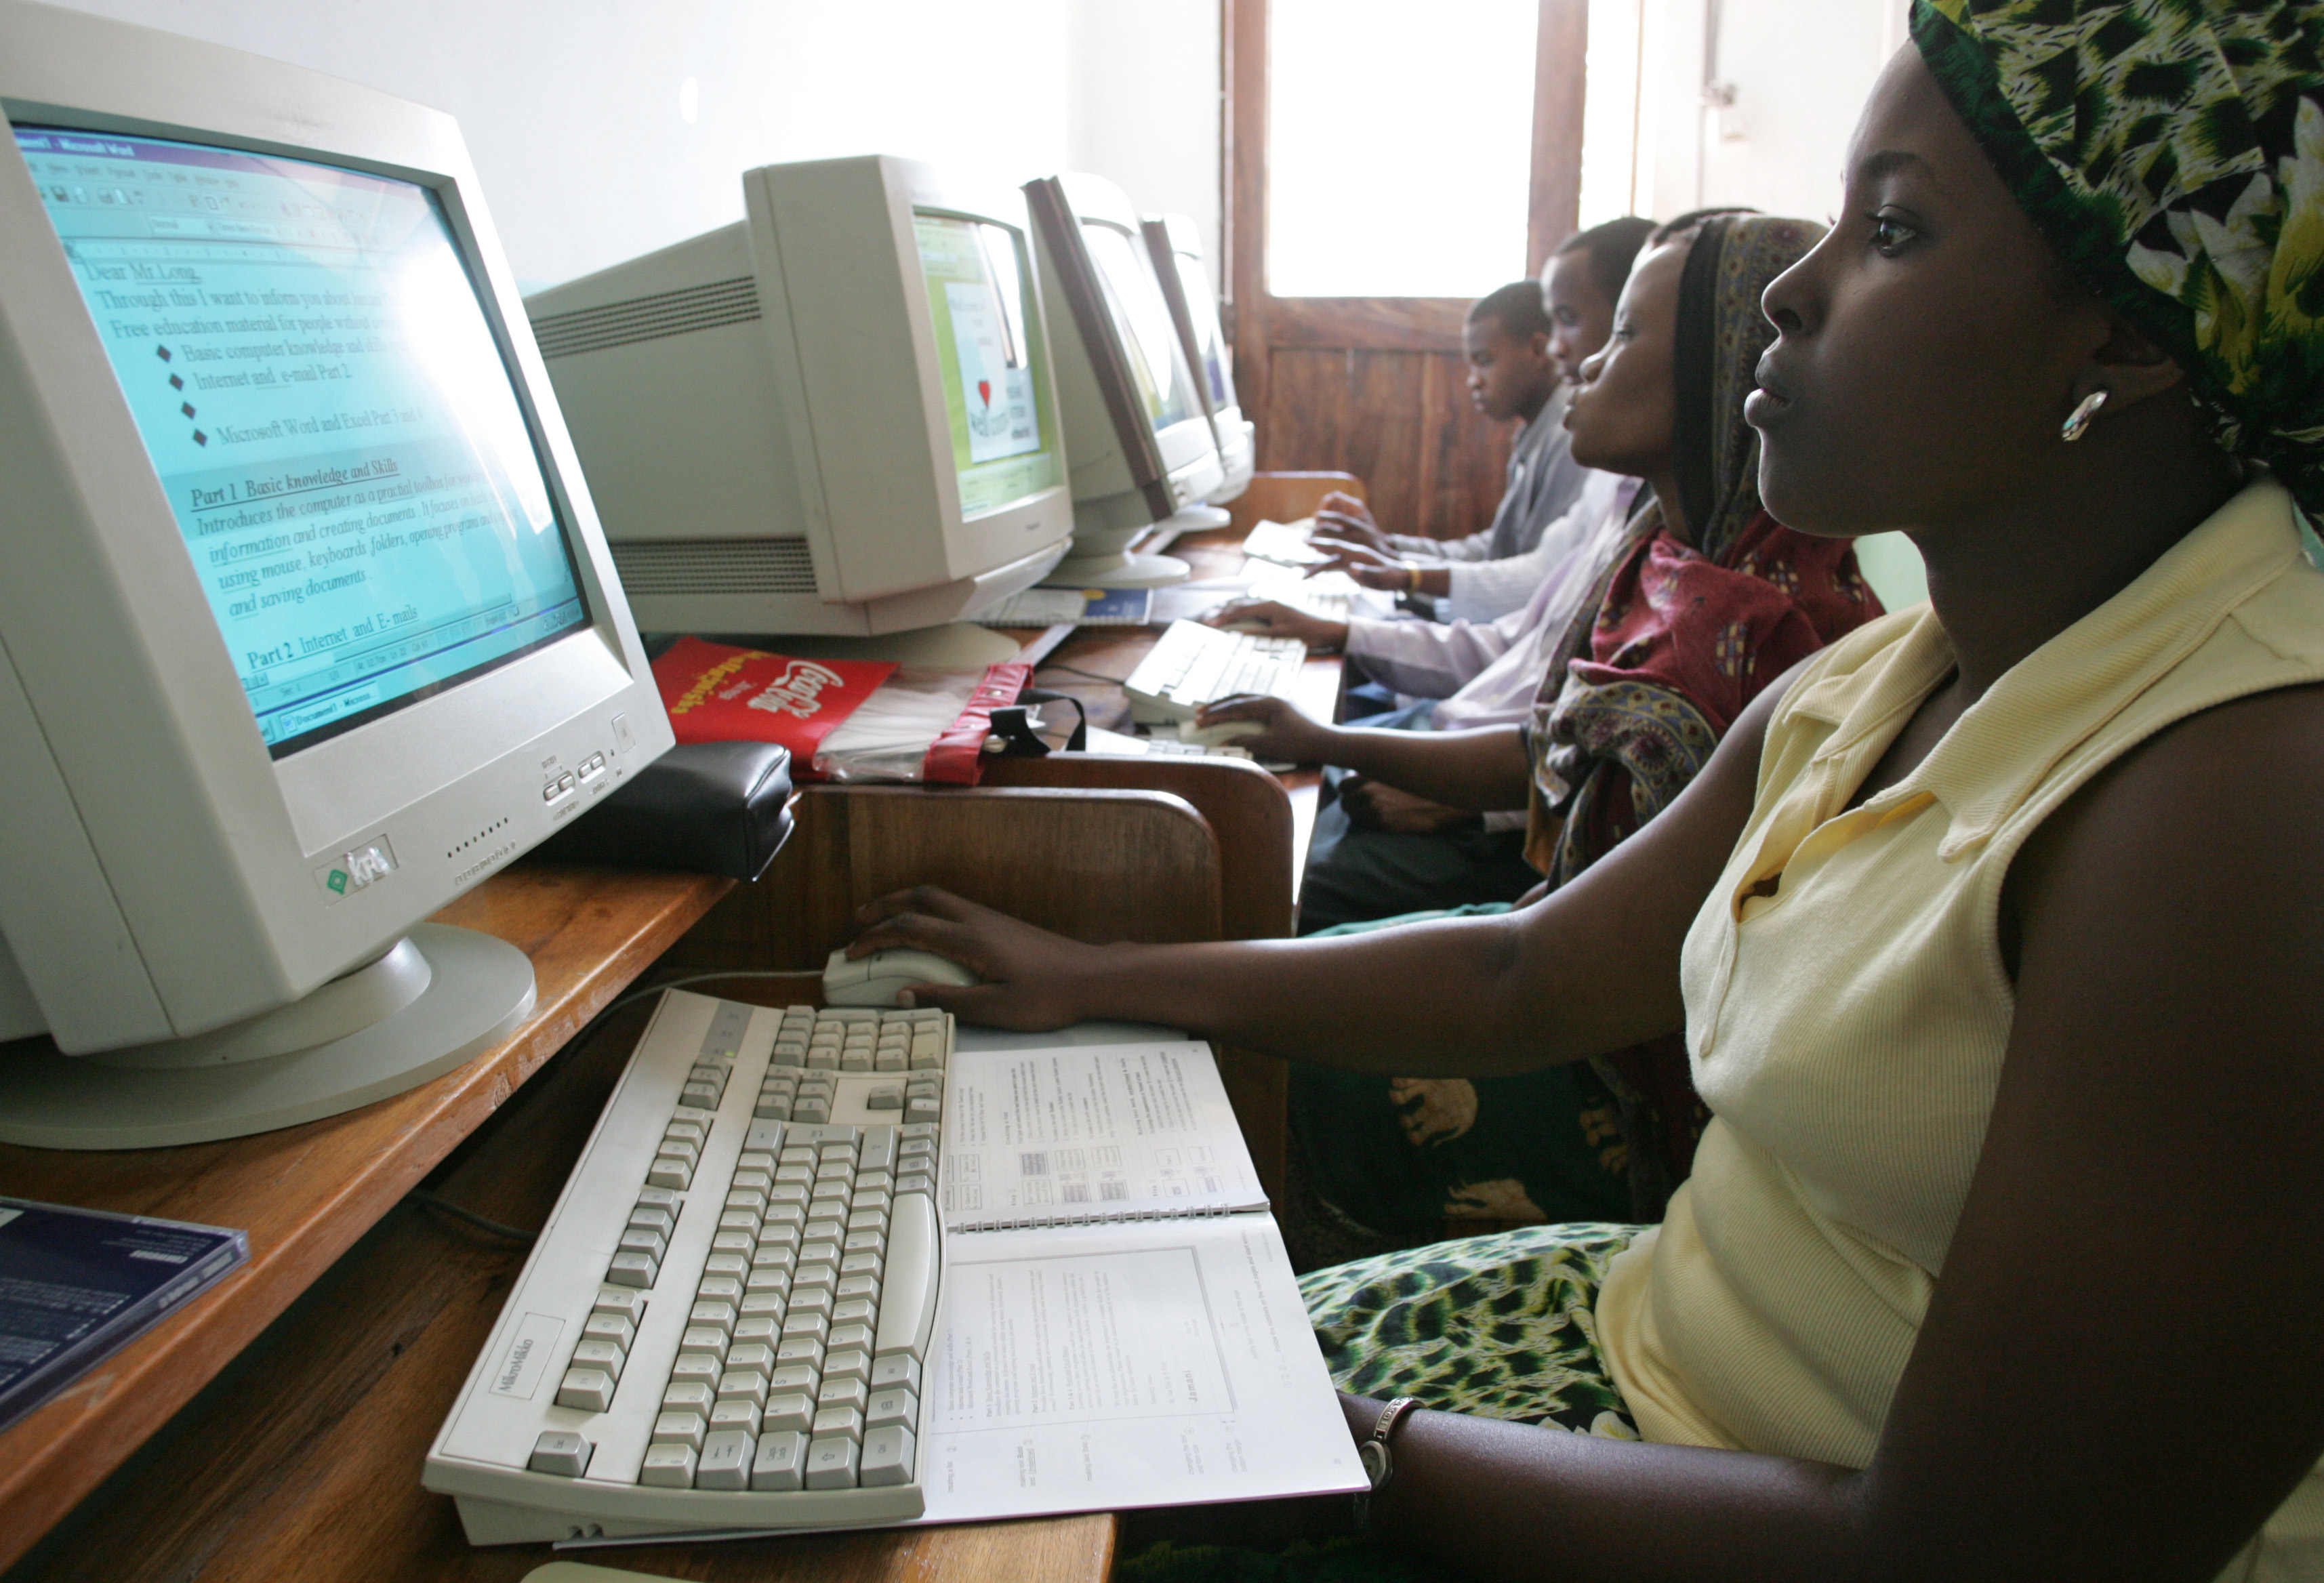 Girls learn how to use computers at a youth centre in Tanga (Tanzania).